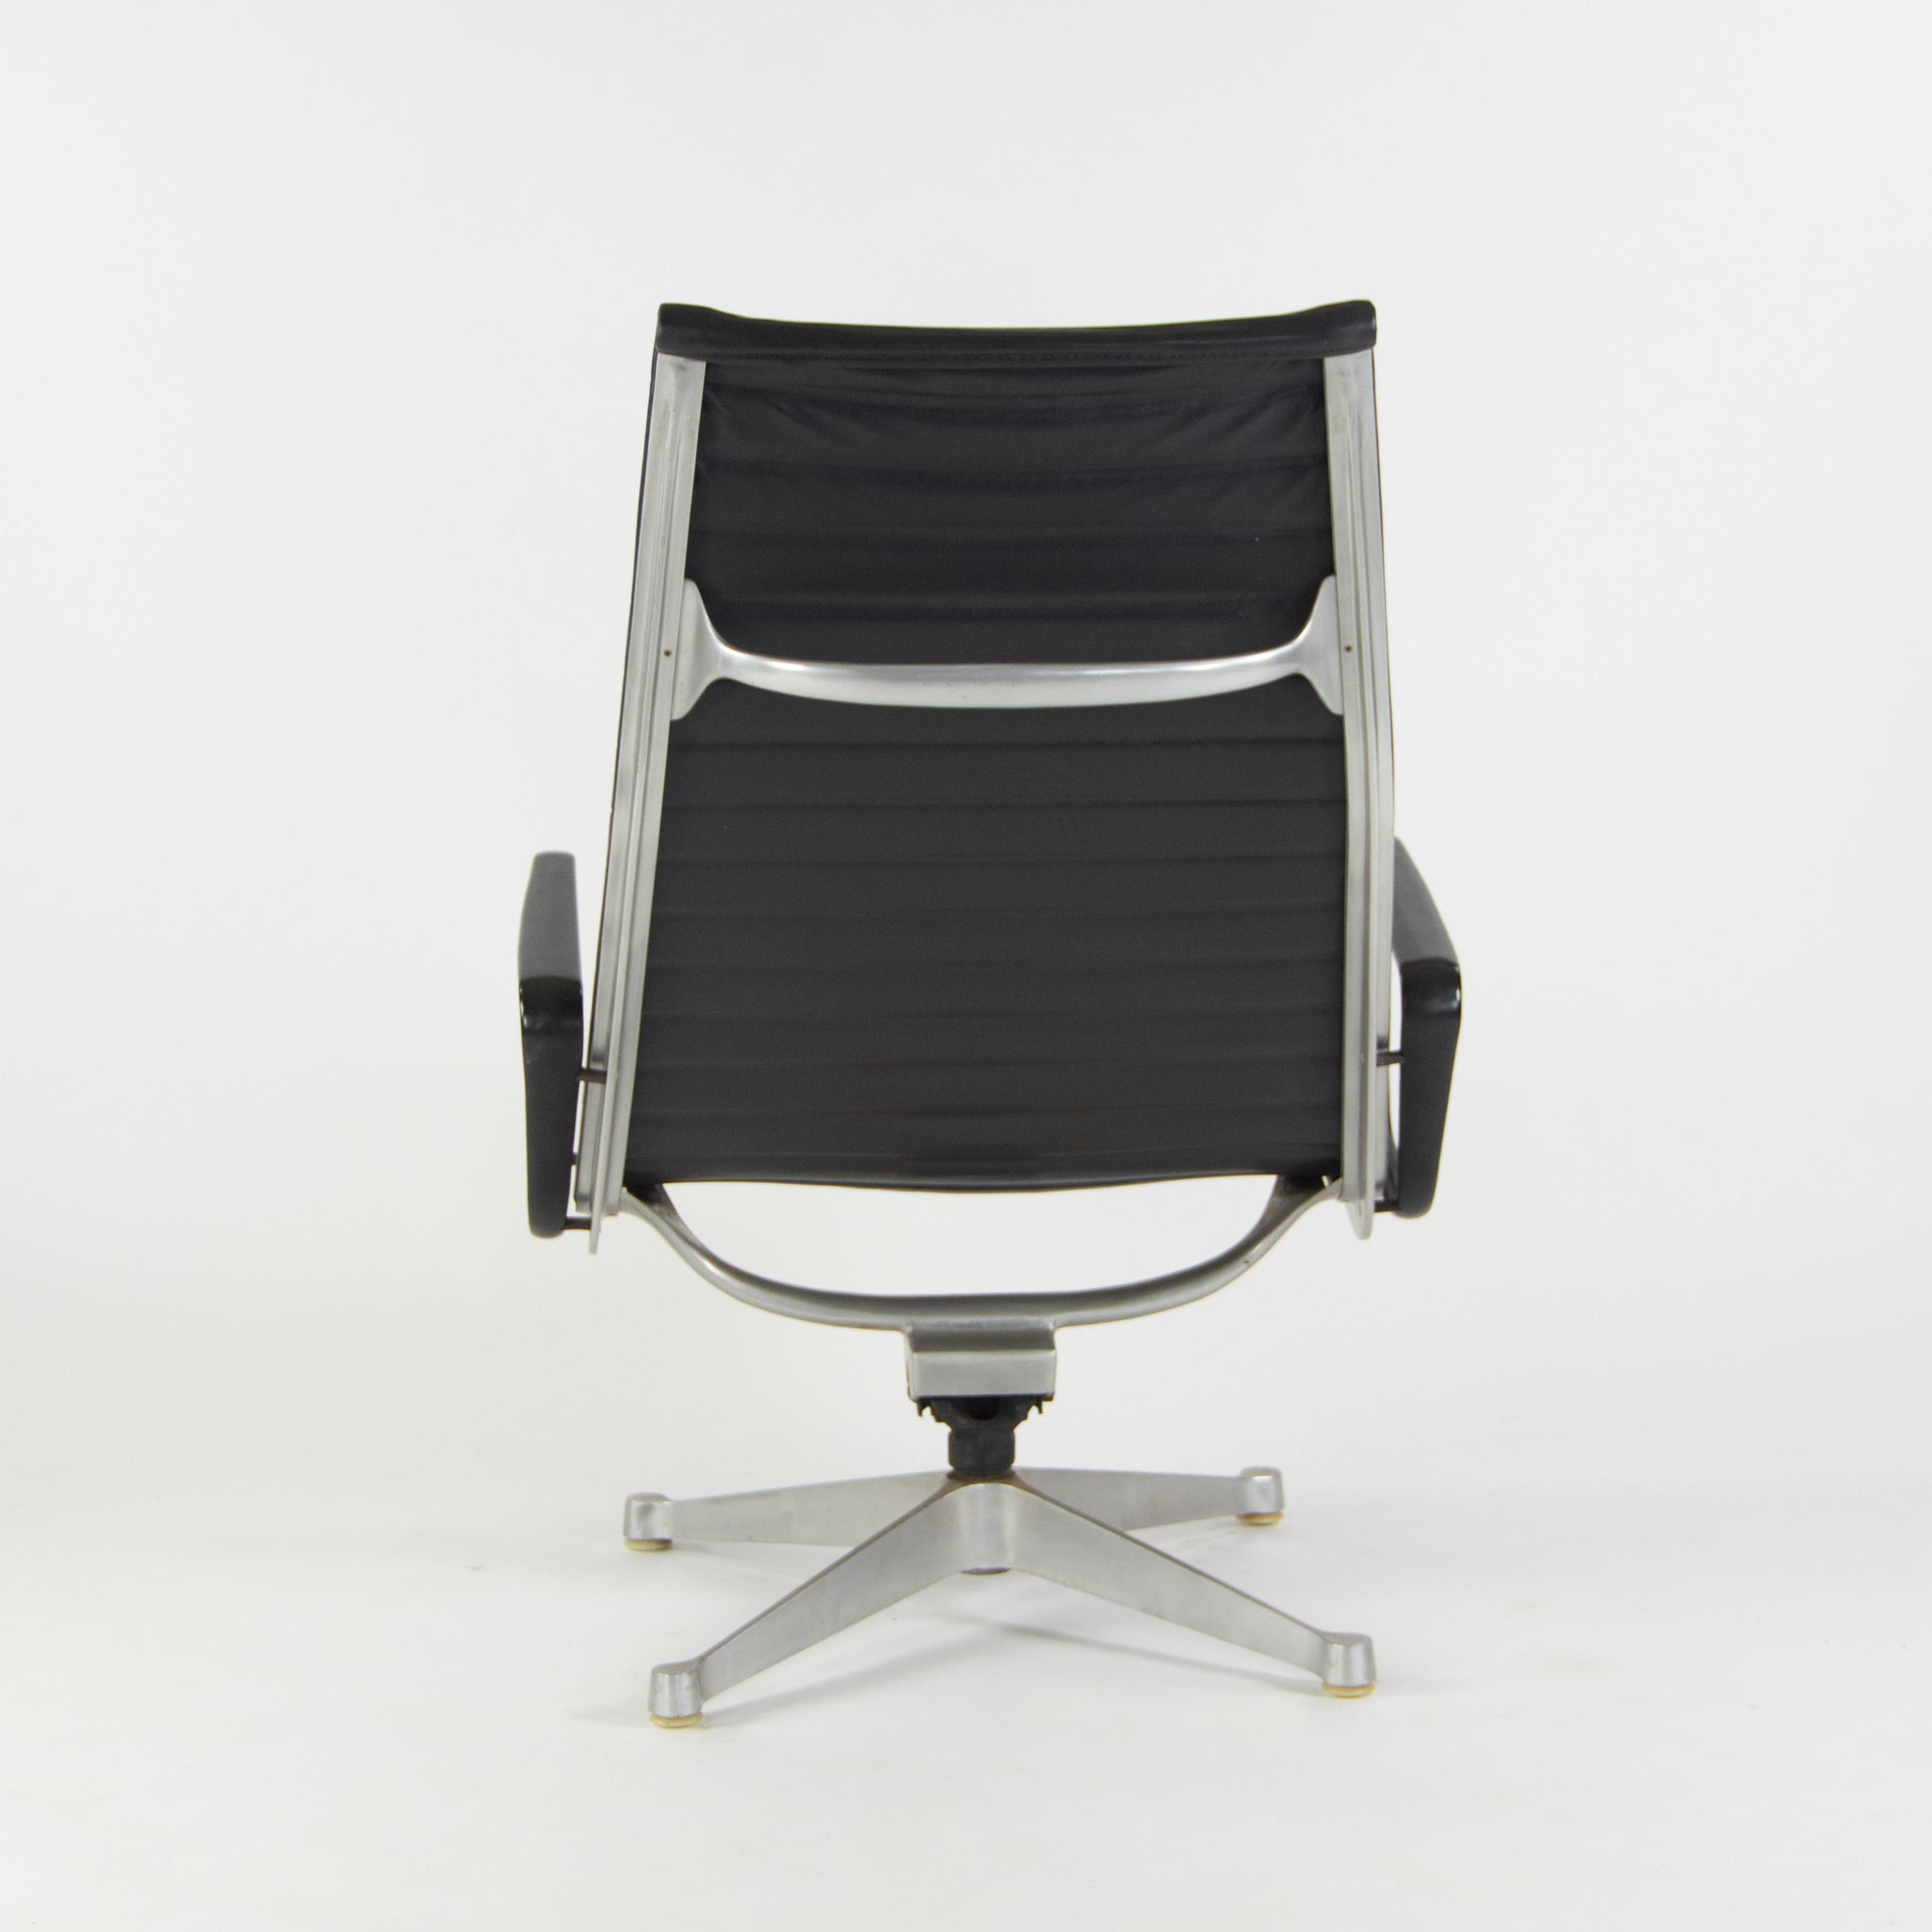 SOLD 1958 Patent Pending Eames Herman Miller Aluminum Group Lounge Chair Charcoal